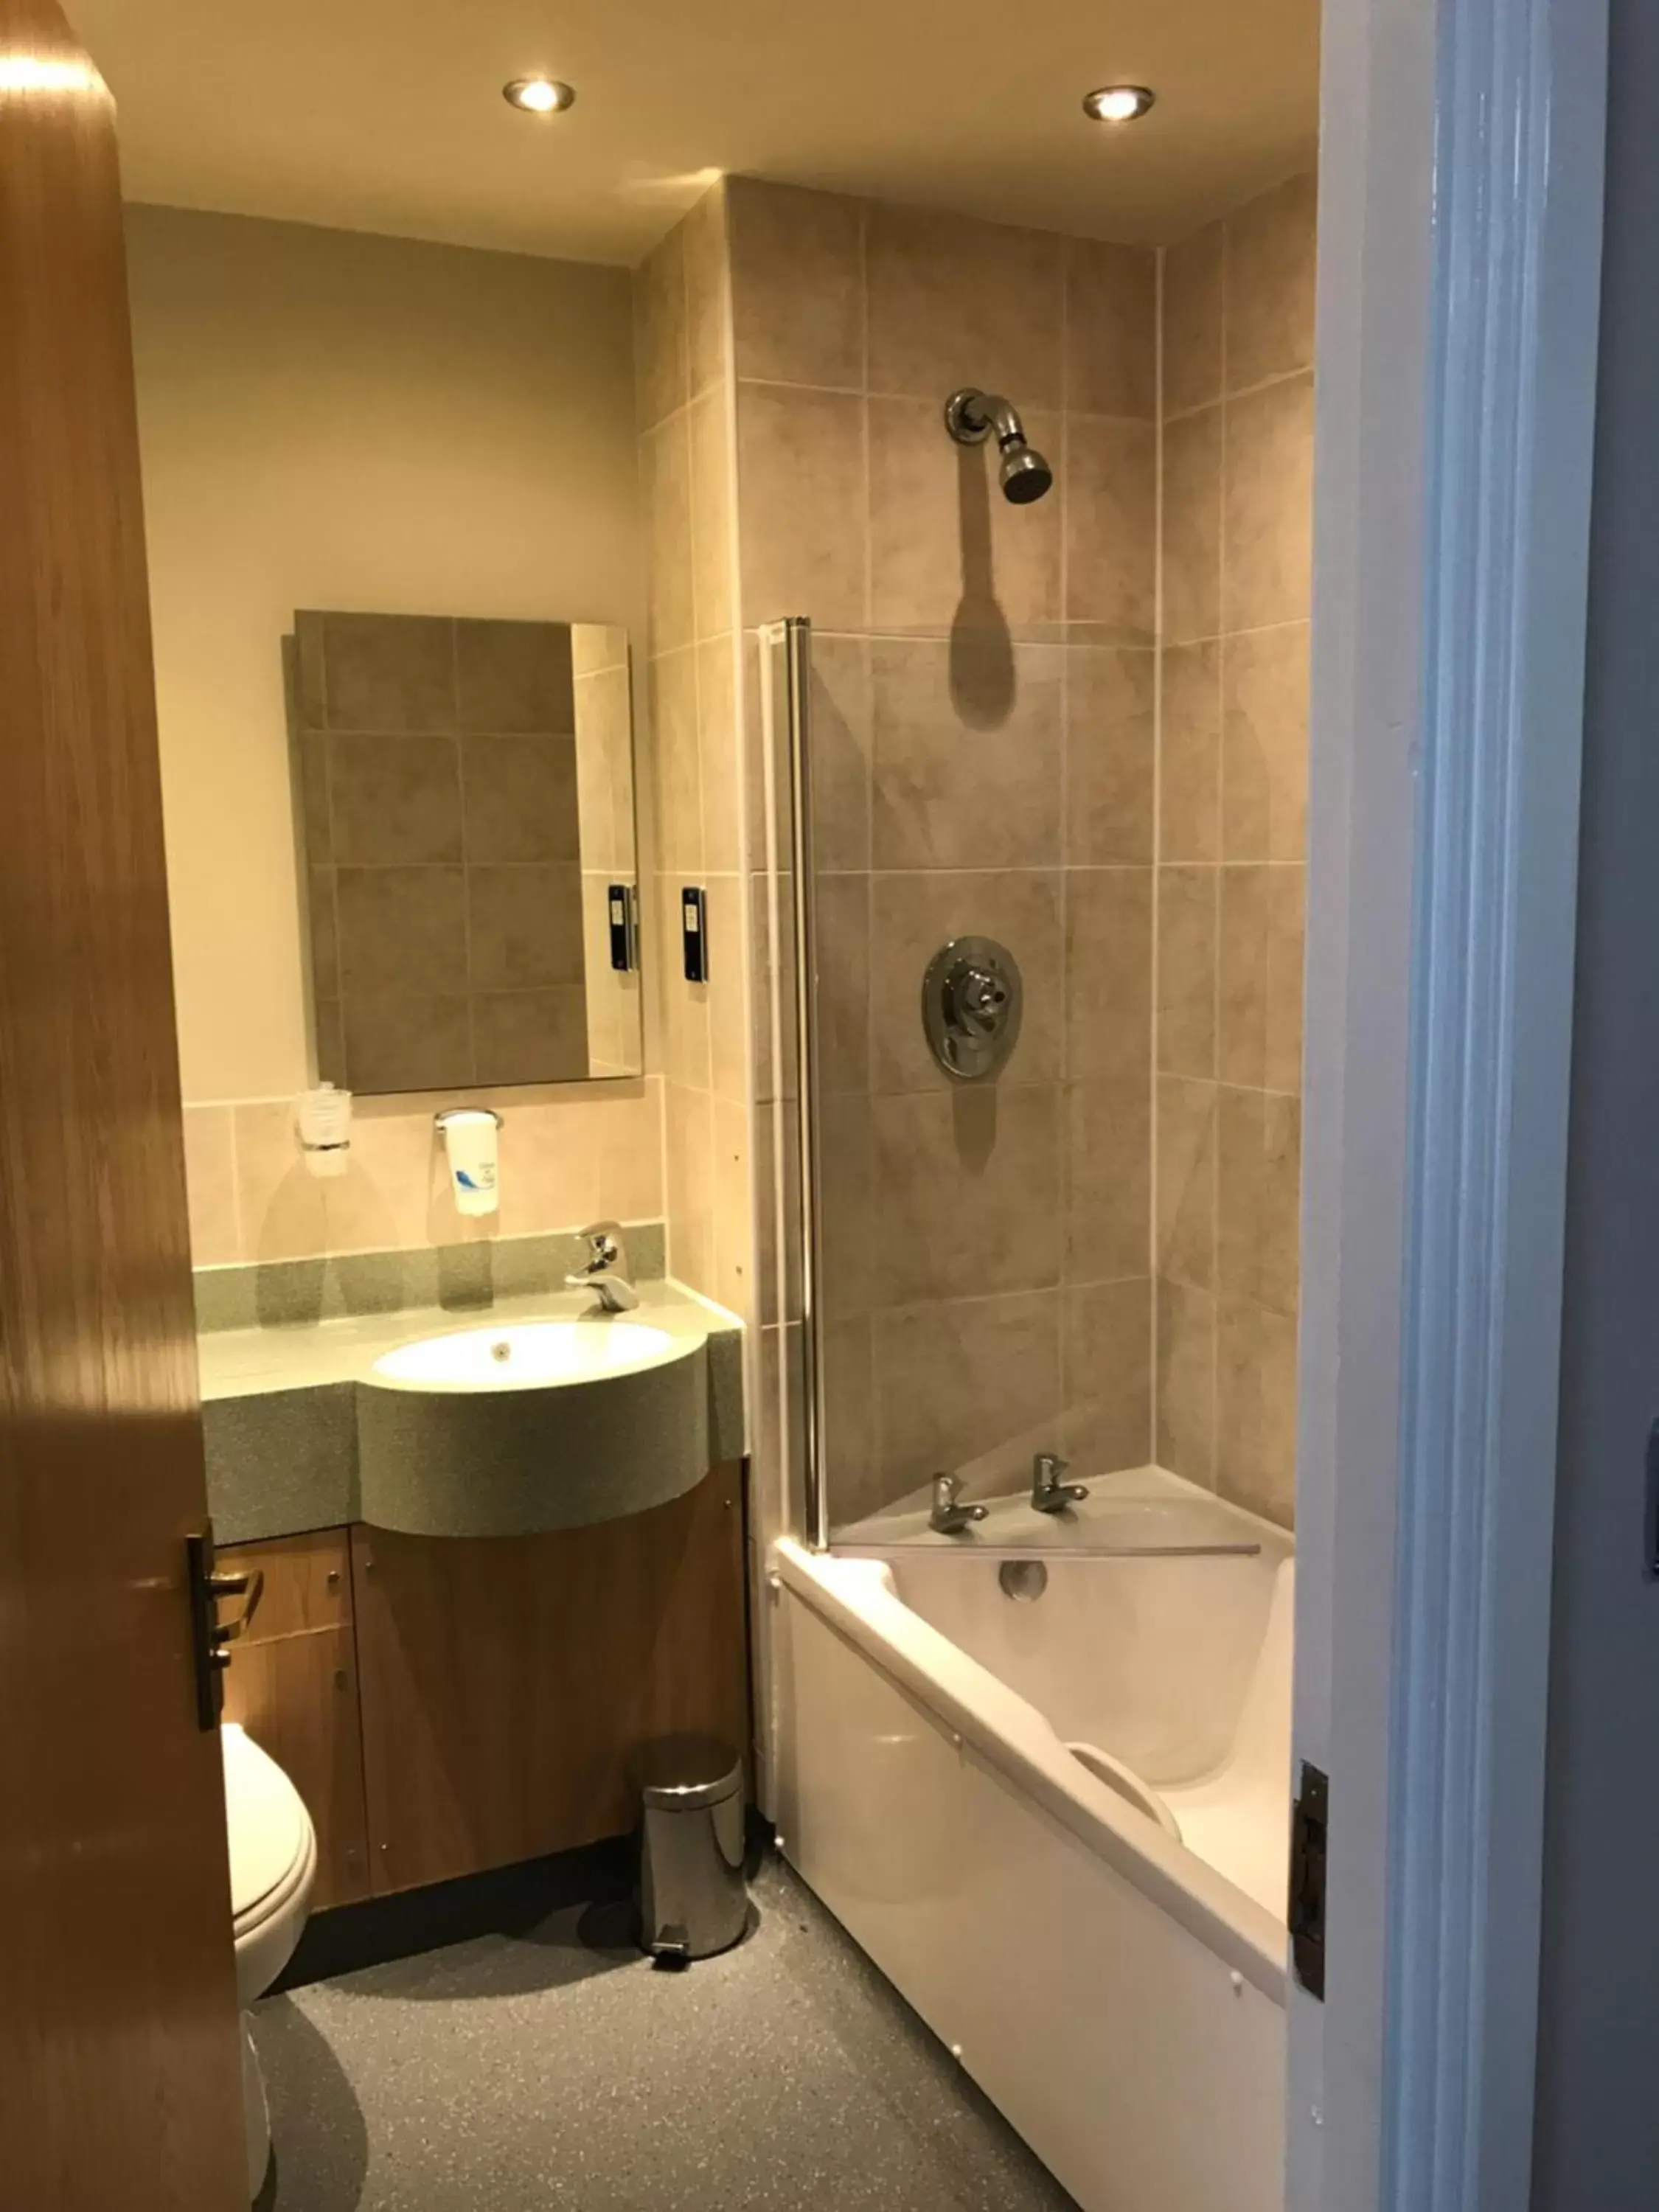 Bathroom in Crown, Droitwich by Marston's Inns